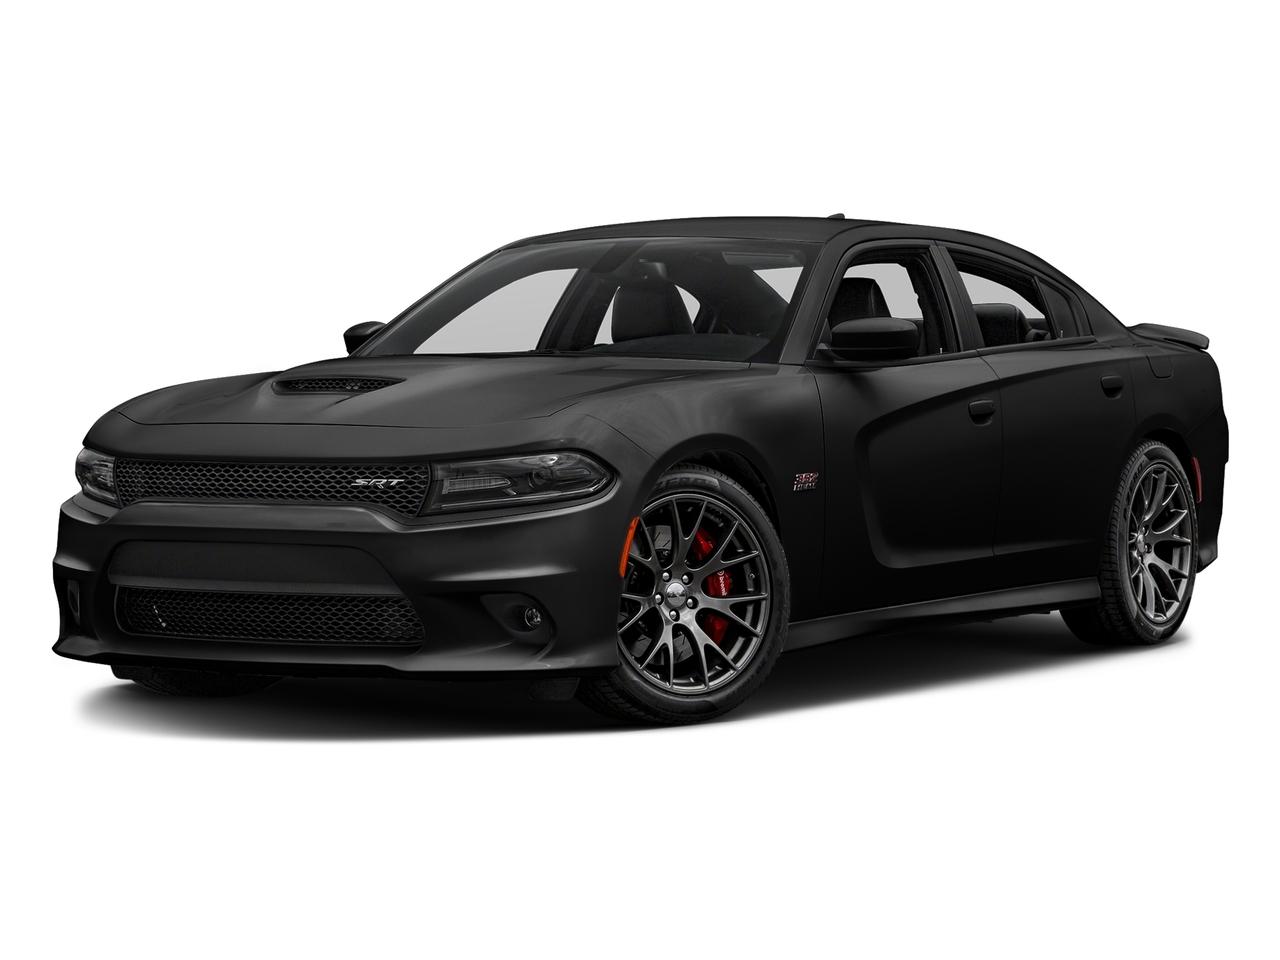 2016 Dodge Charger Vehicle Photo in Grapevine, TX 76051